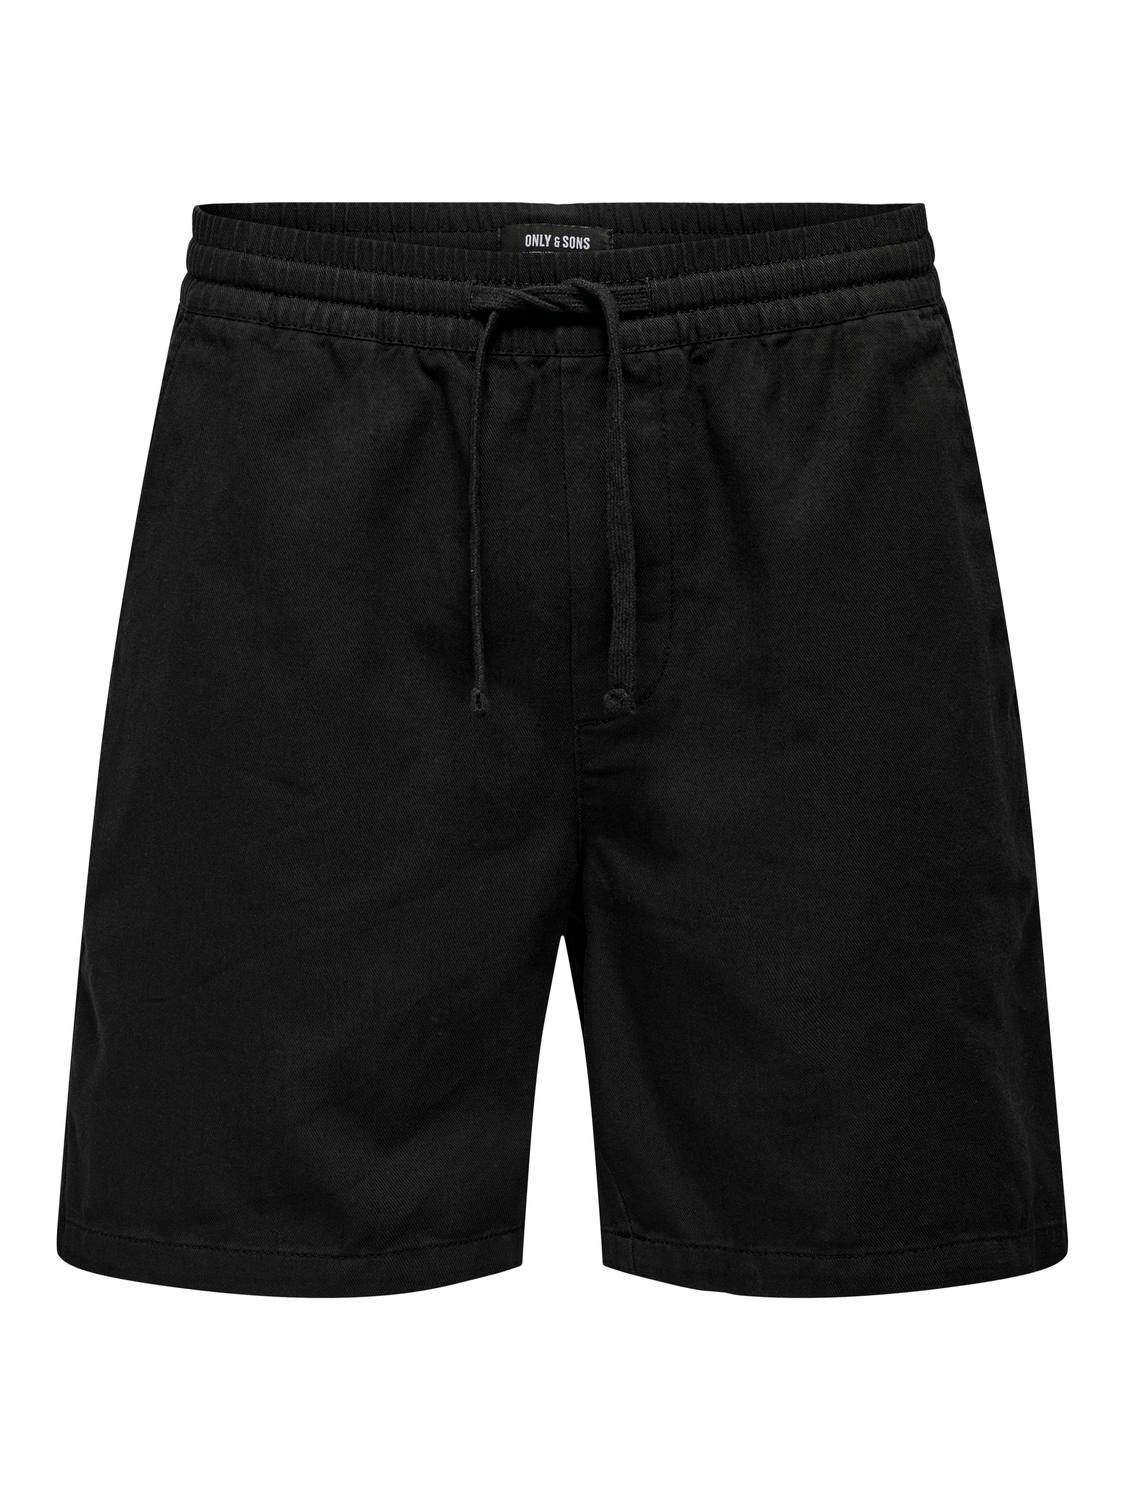 ONLY & SONS Shorts Regular Fit Taille moyenne -Black - 22025790